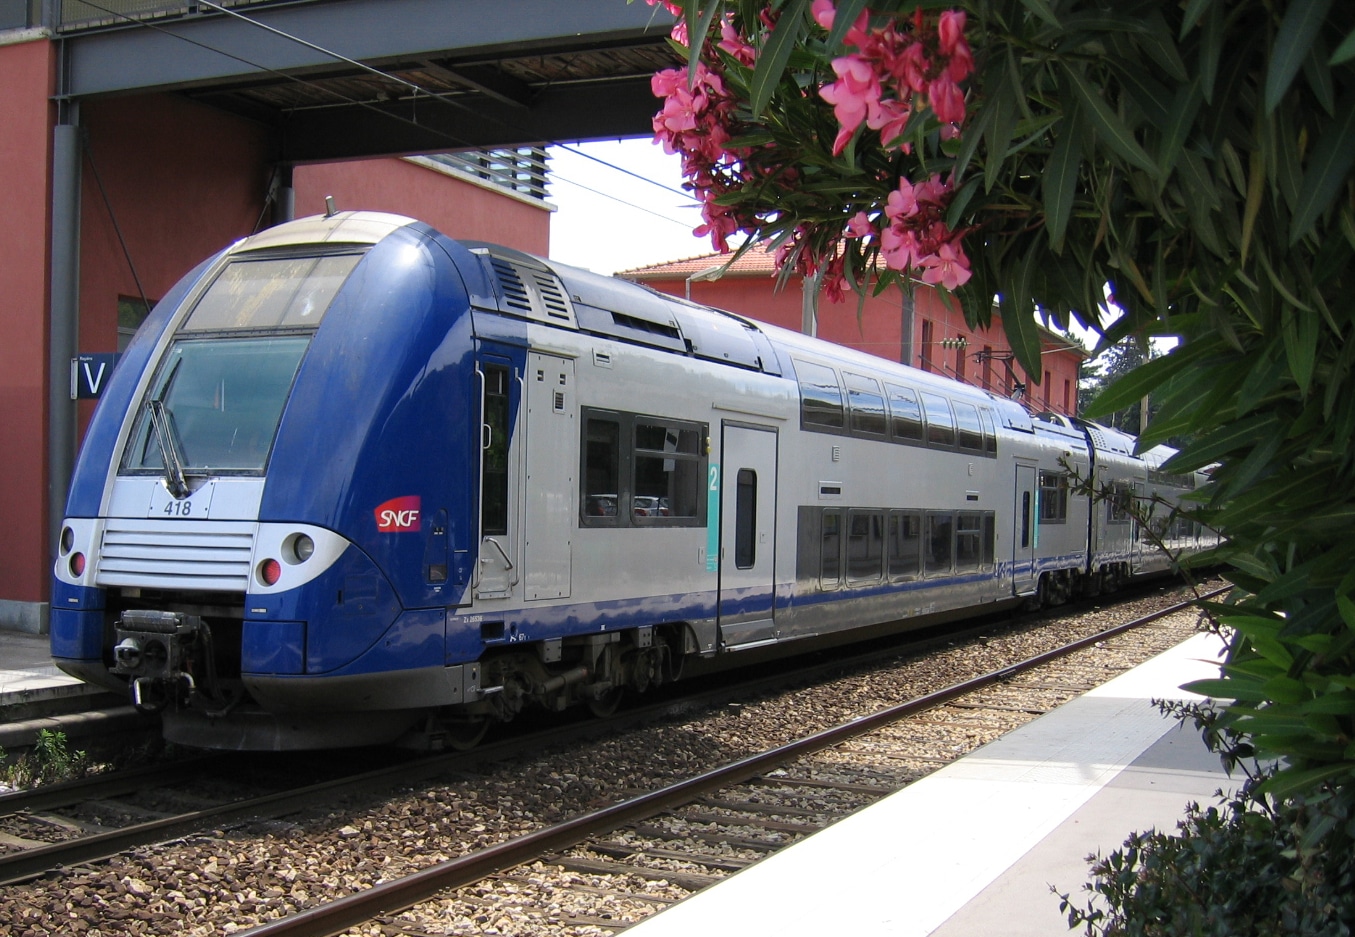 Getting around by train in the Nice Area